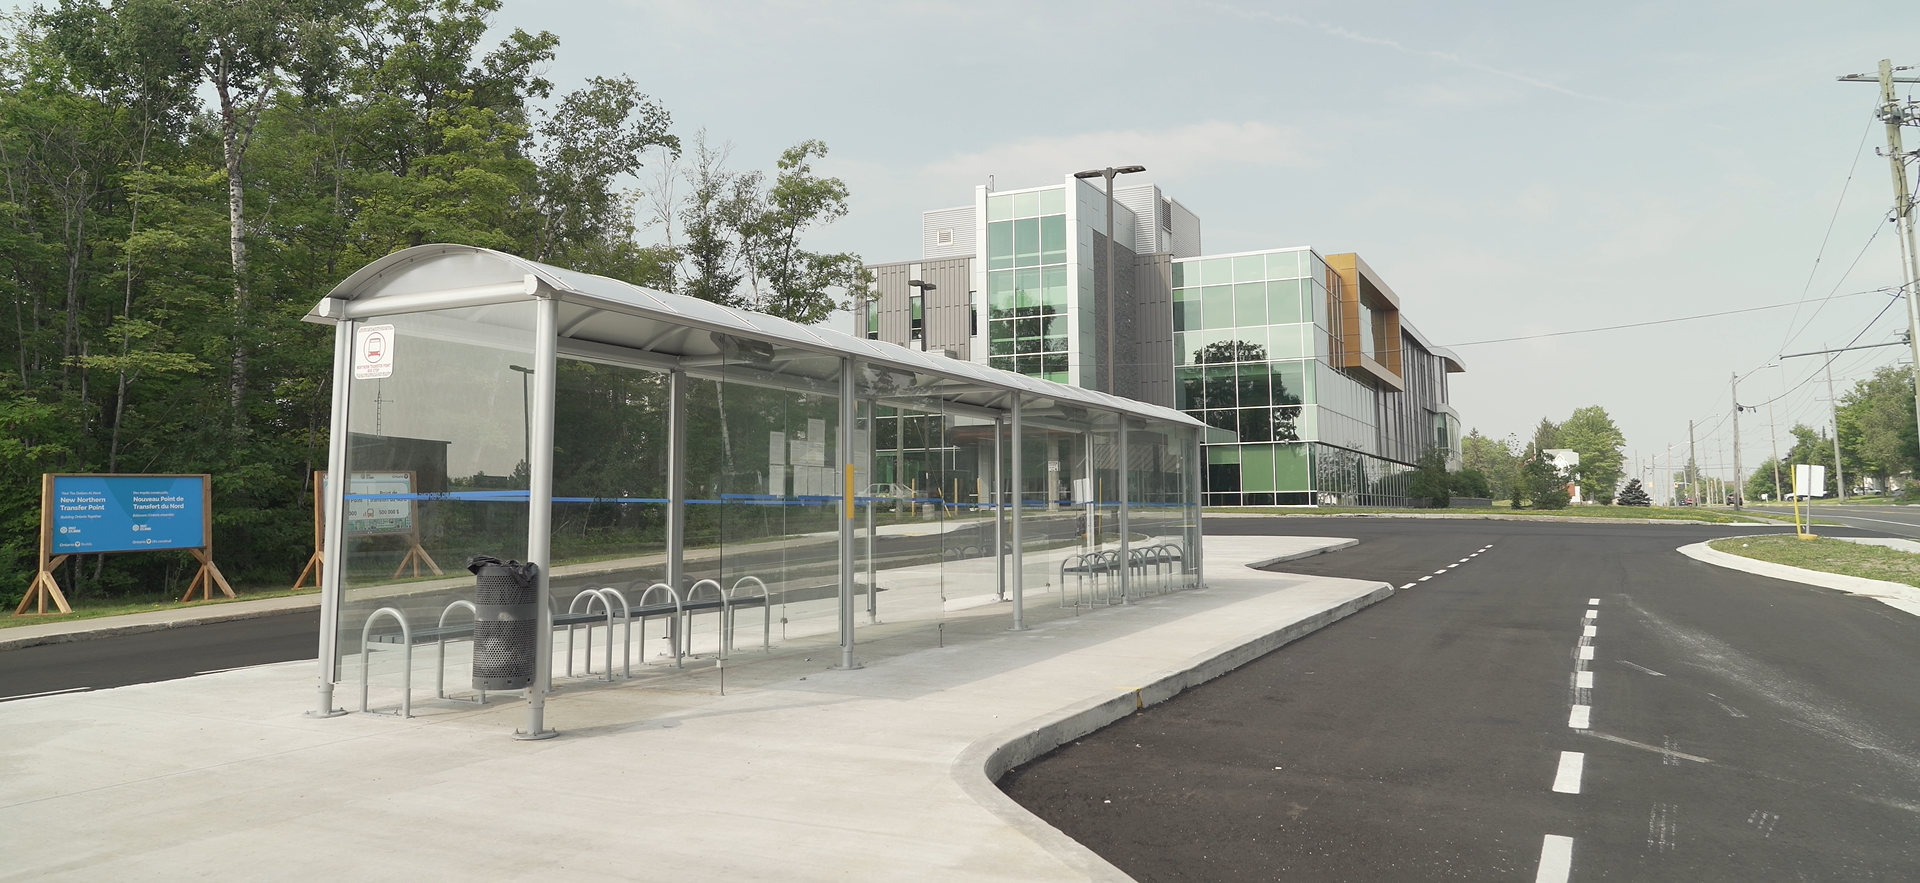 photo of Northern Ave. Transit Hub bus stop with Sault College in background